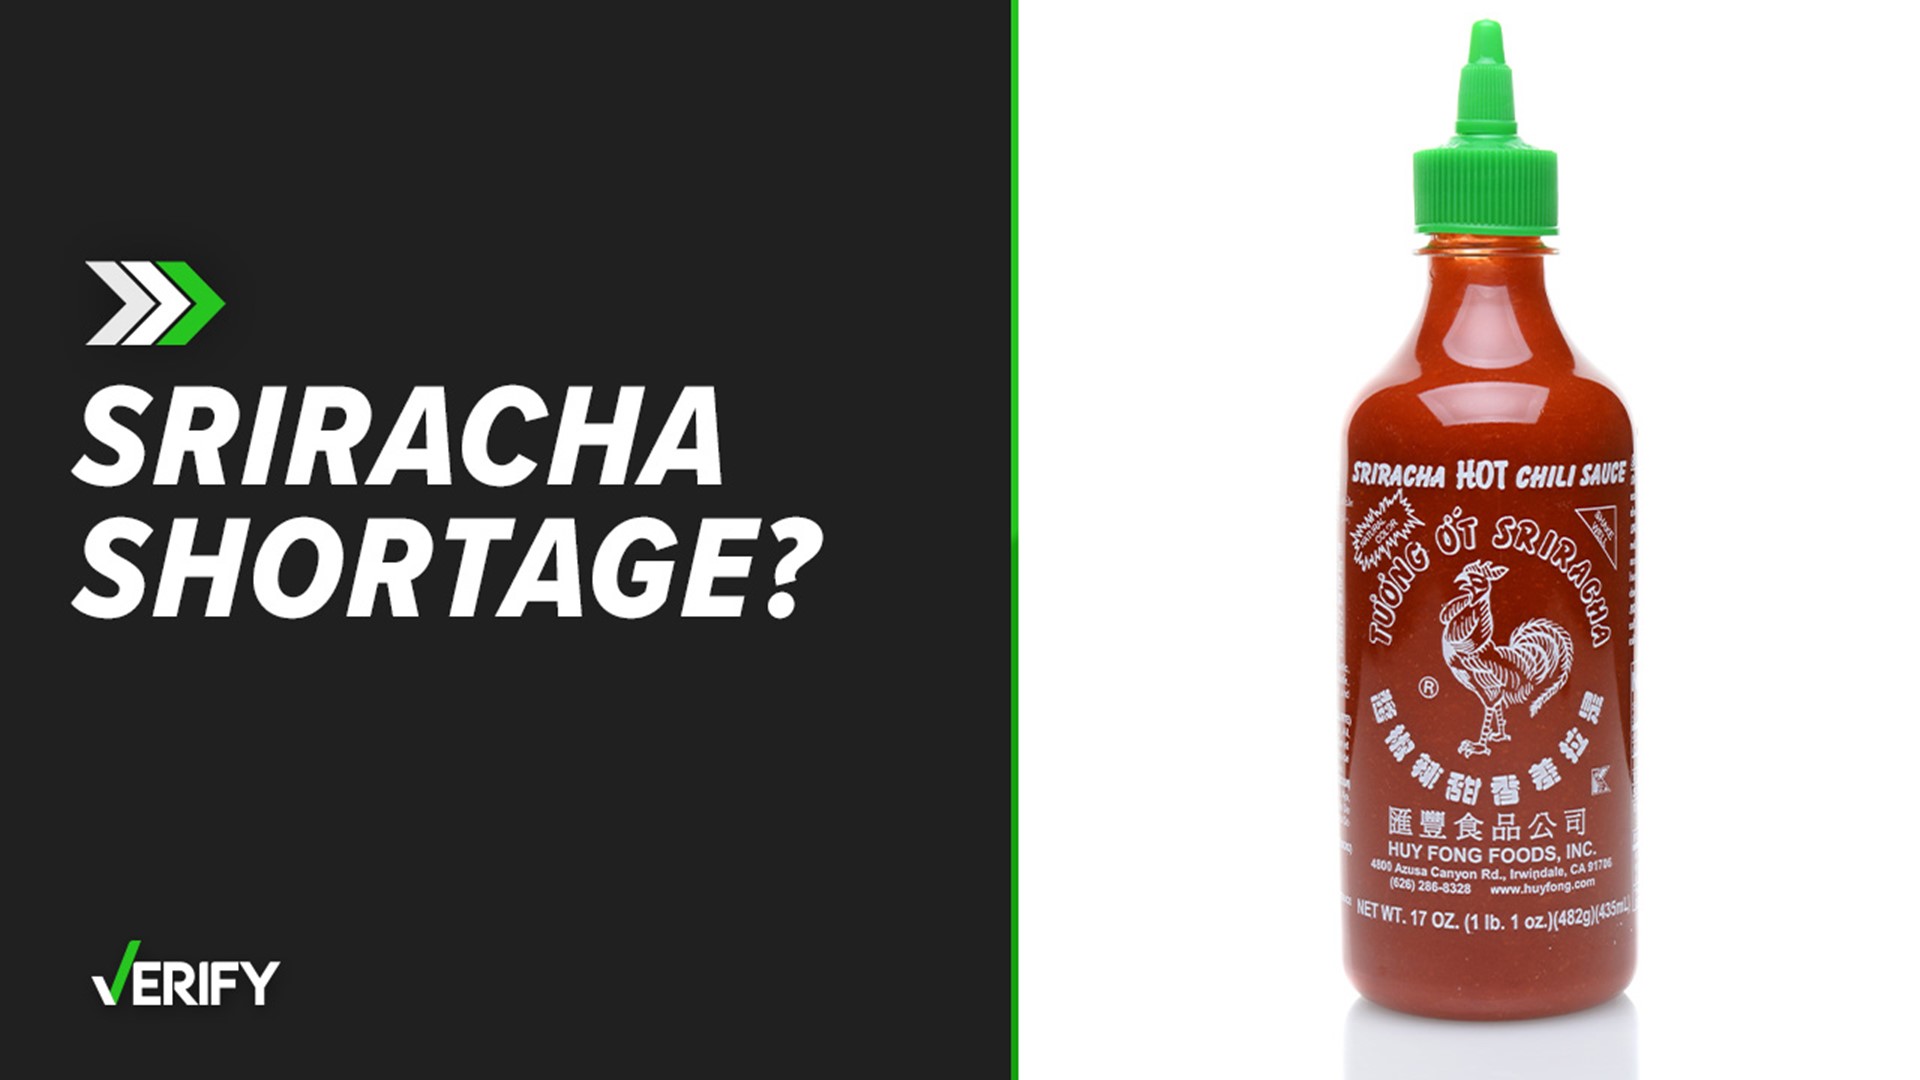 There's an 'Unprecedented' Sriracha Shortage Right Now - The New